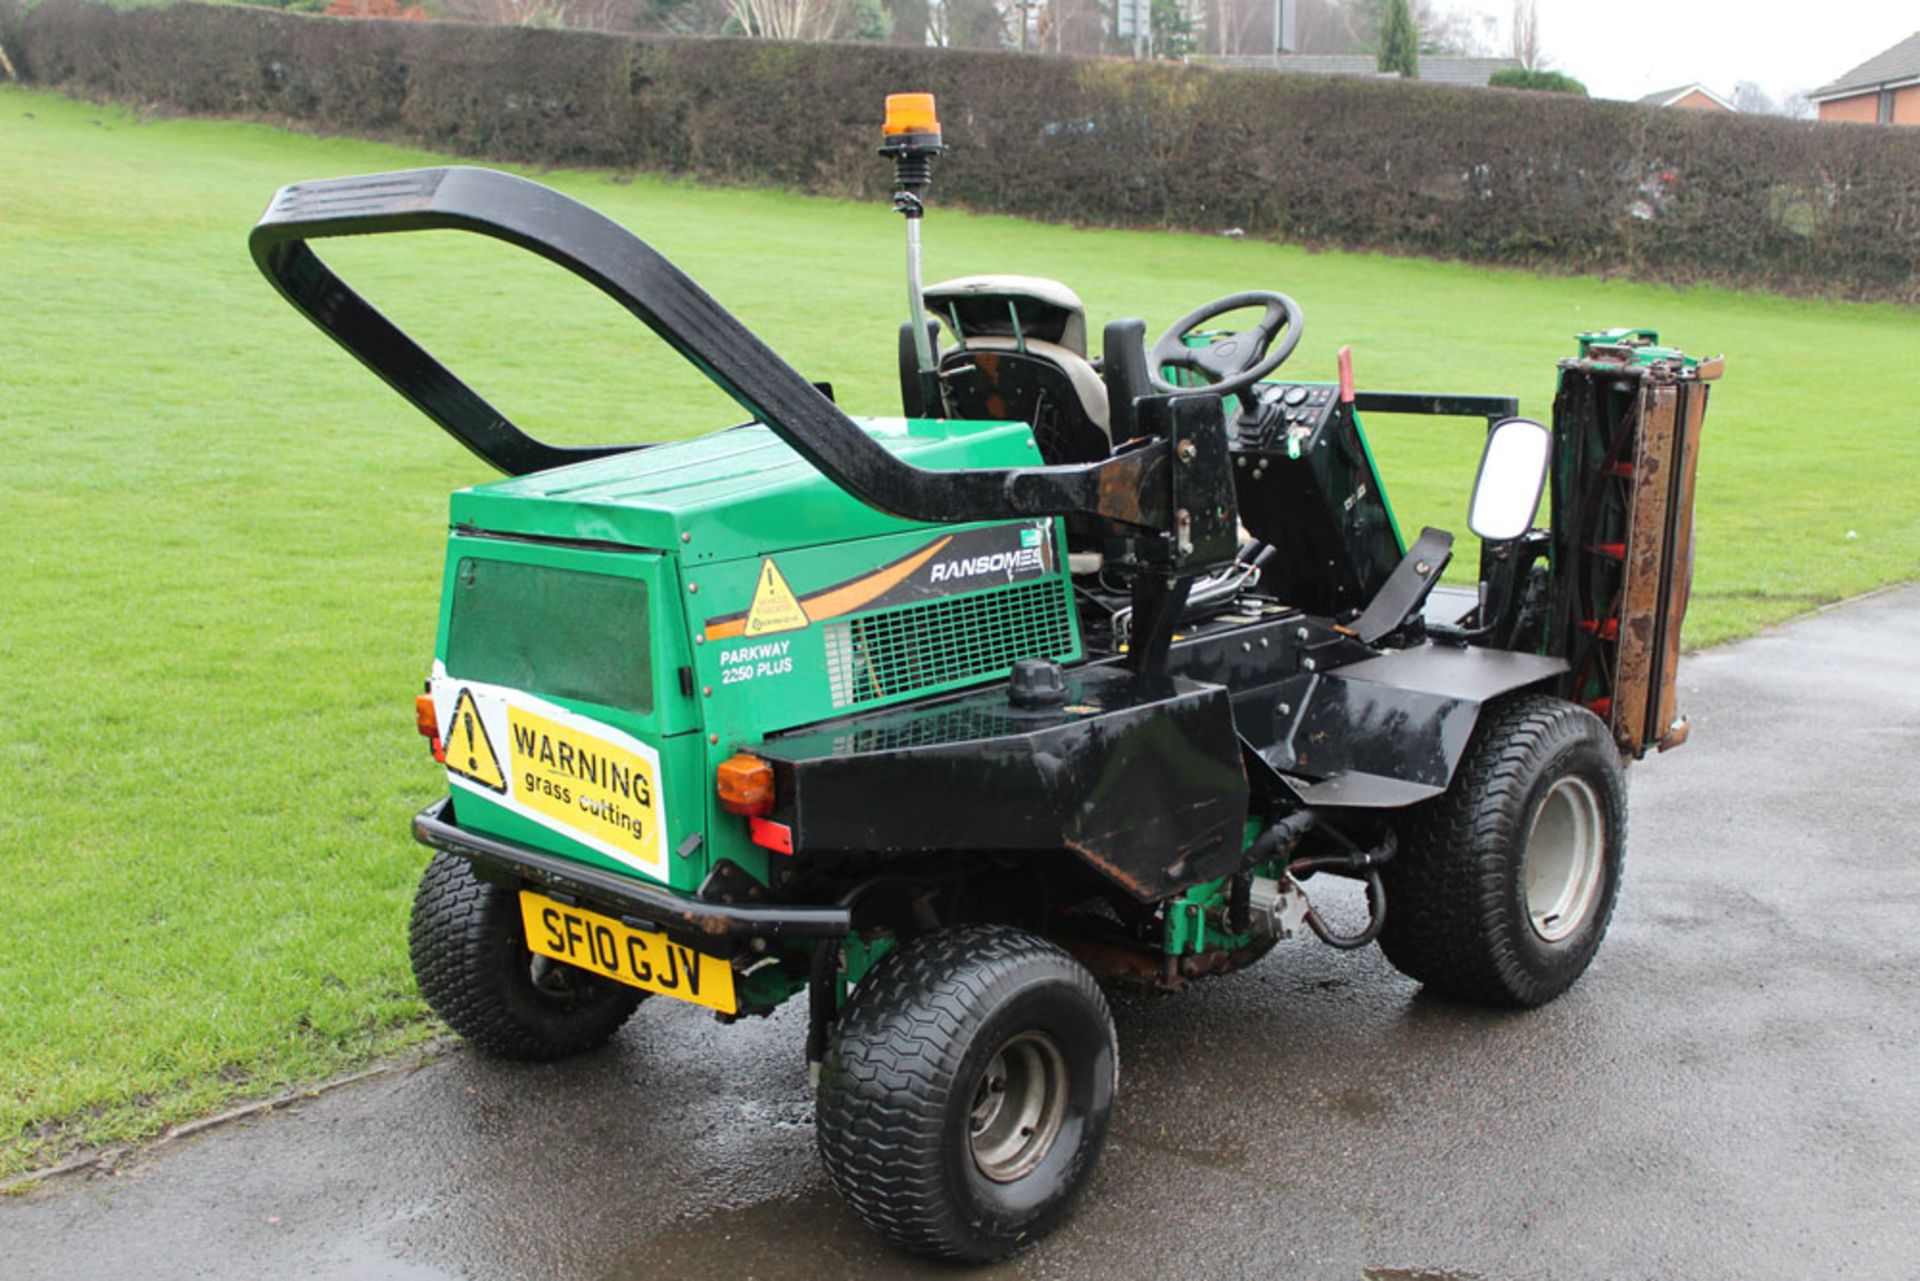 2010 Ransomes Parkway 2250 Plus Ride On Cylinder Mower - Image 5 of 8